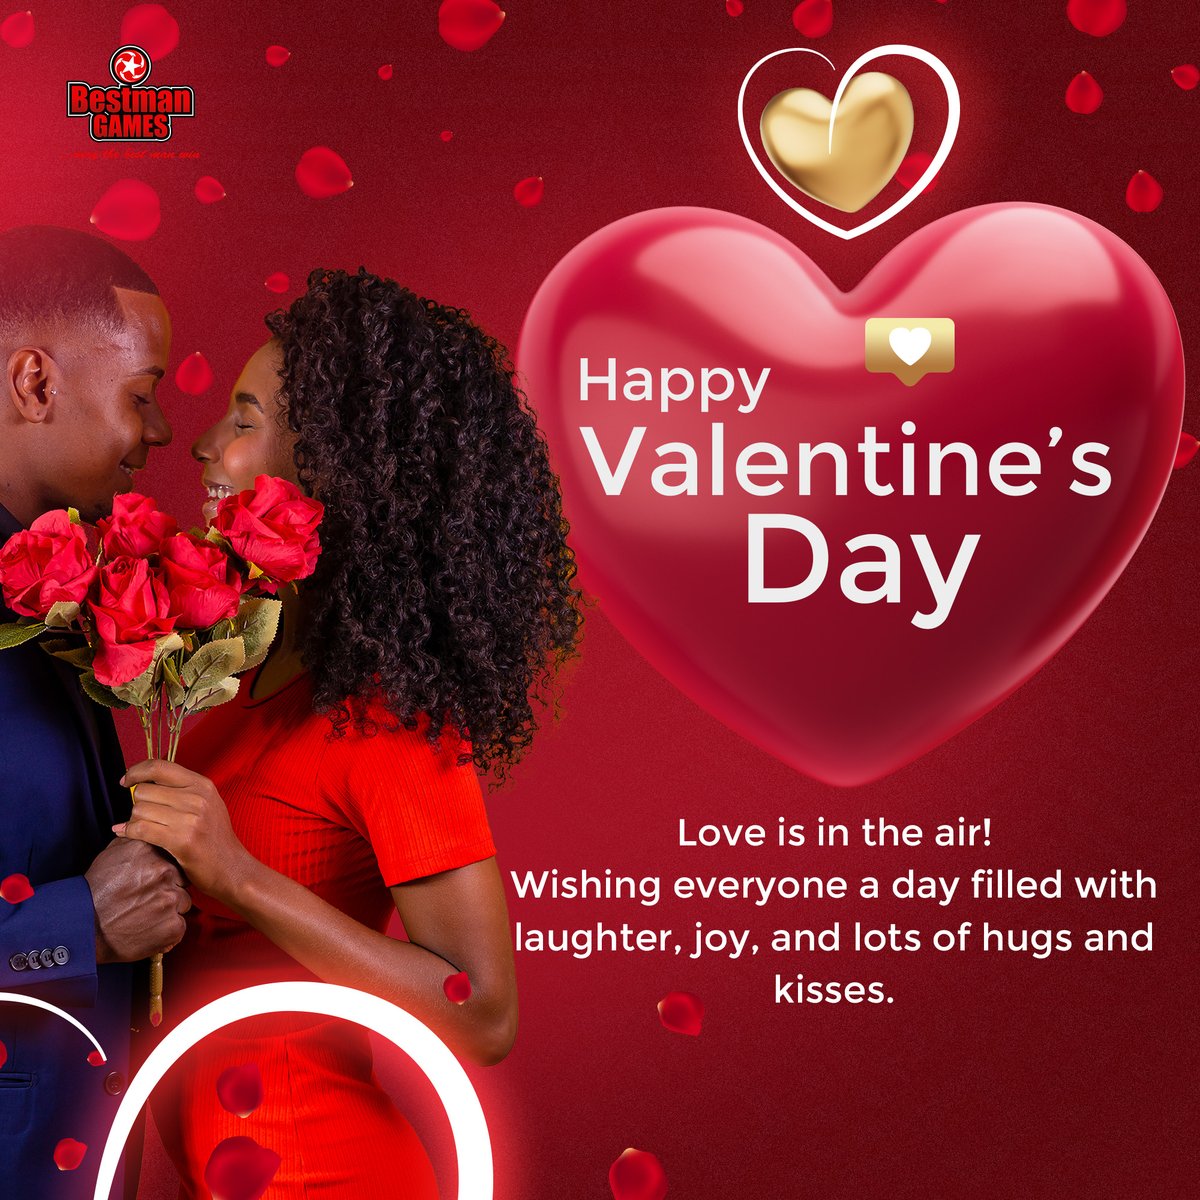 It's the season of love, Bestman games wish you a happy Valentine's Day. We hope you enjoy the day with your fav and create fun and long-lasting memories.

#happyvalentinesday #spreadlove #gift #datenight #bestmangames #familybonding #wednesday #financialfreedom